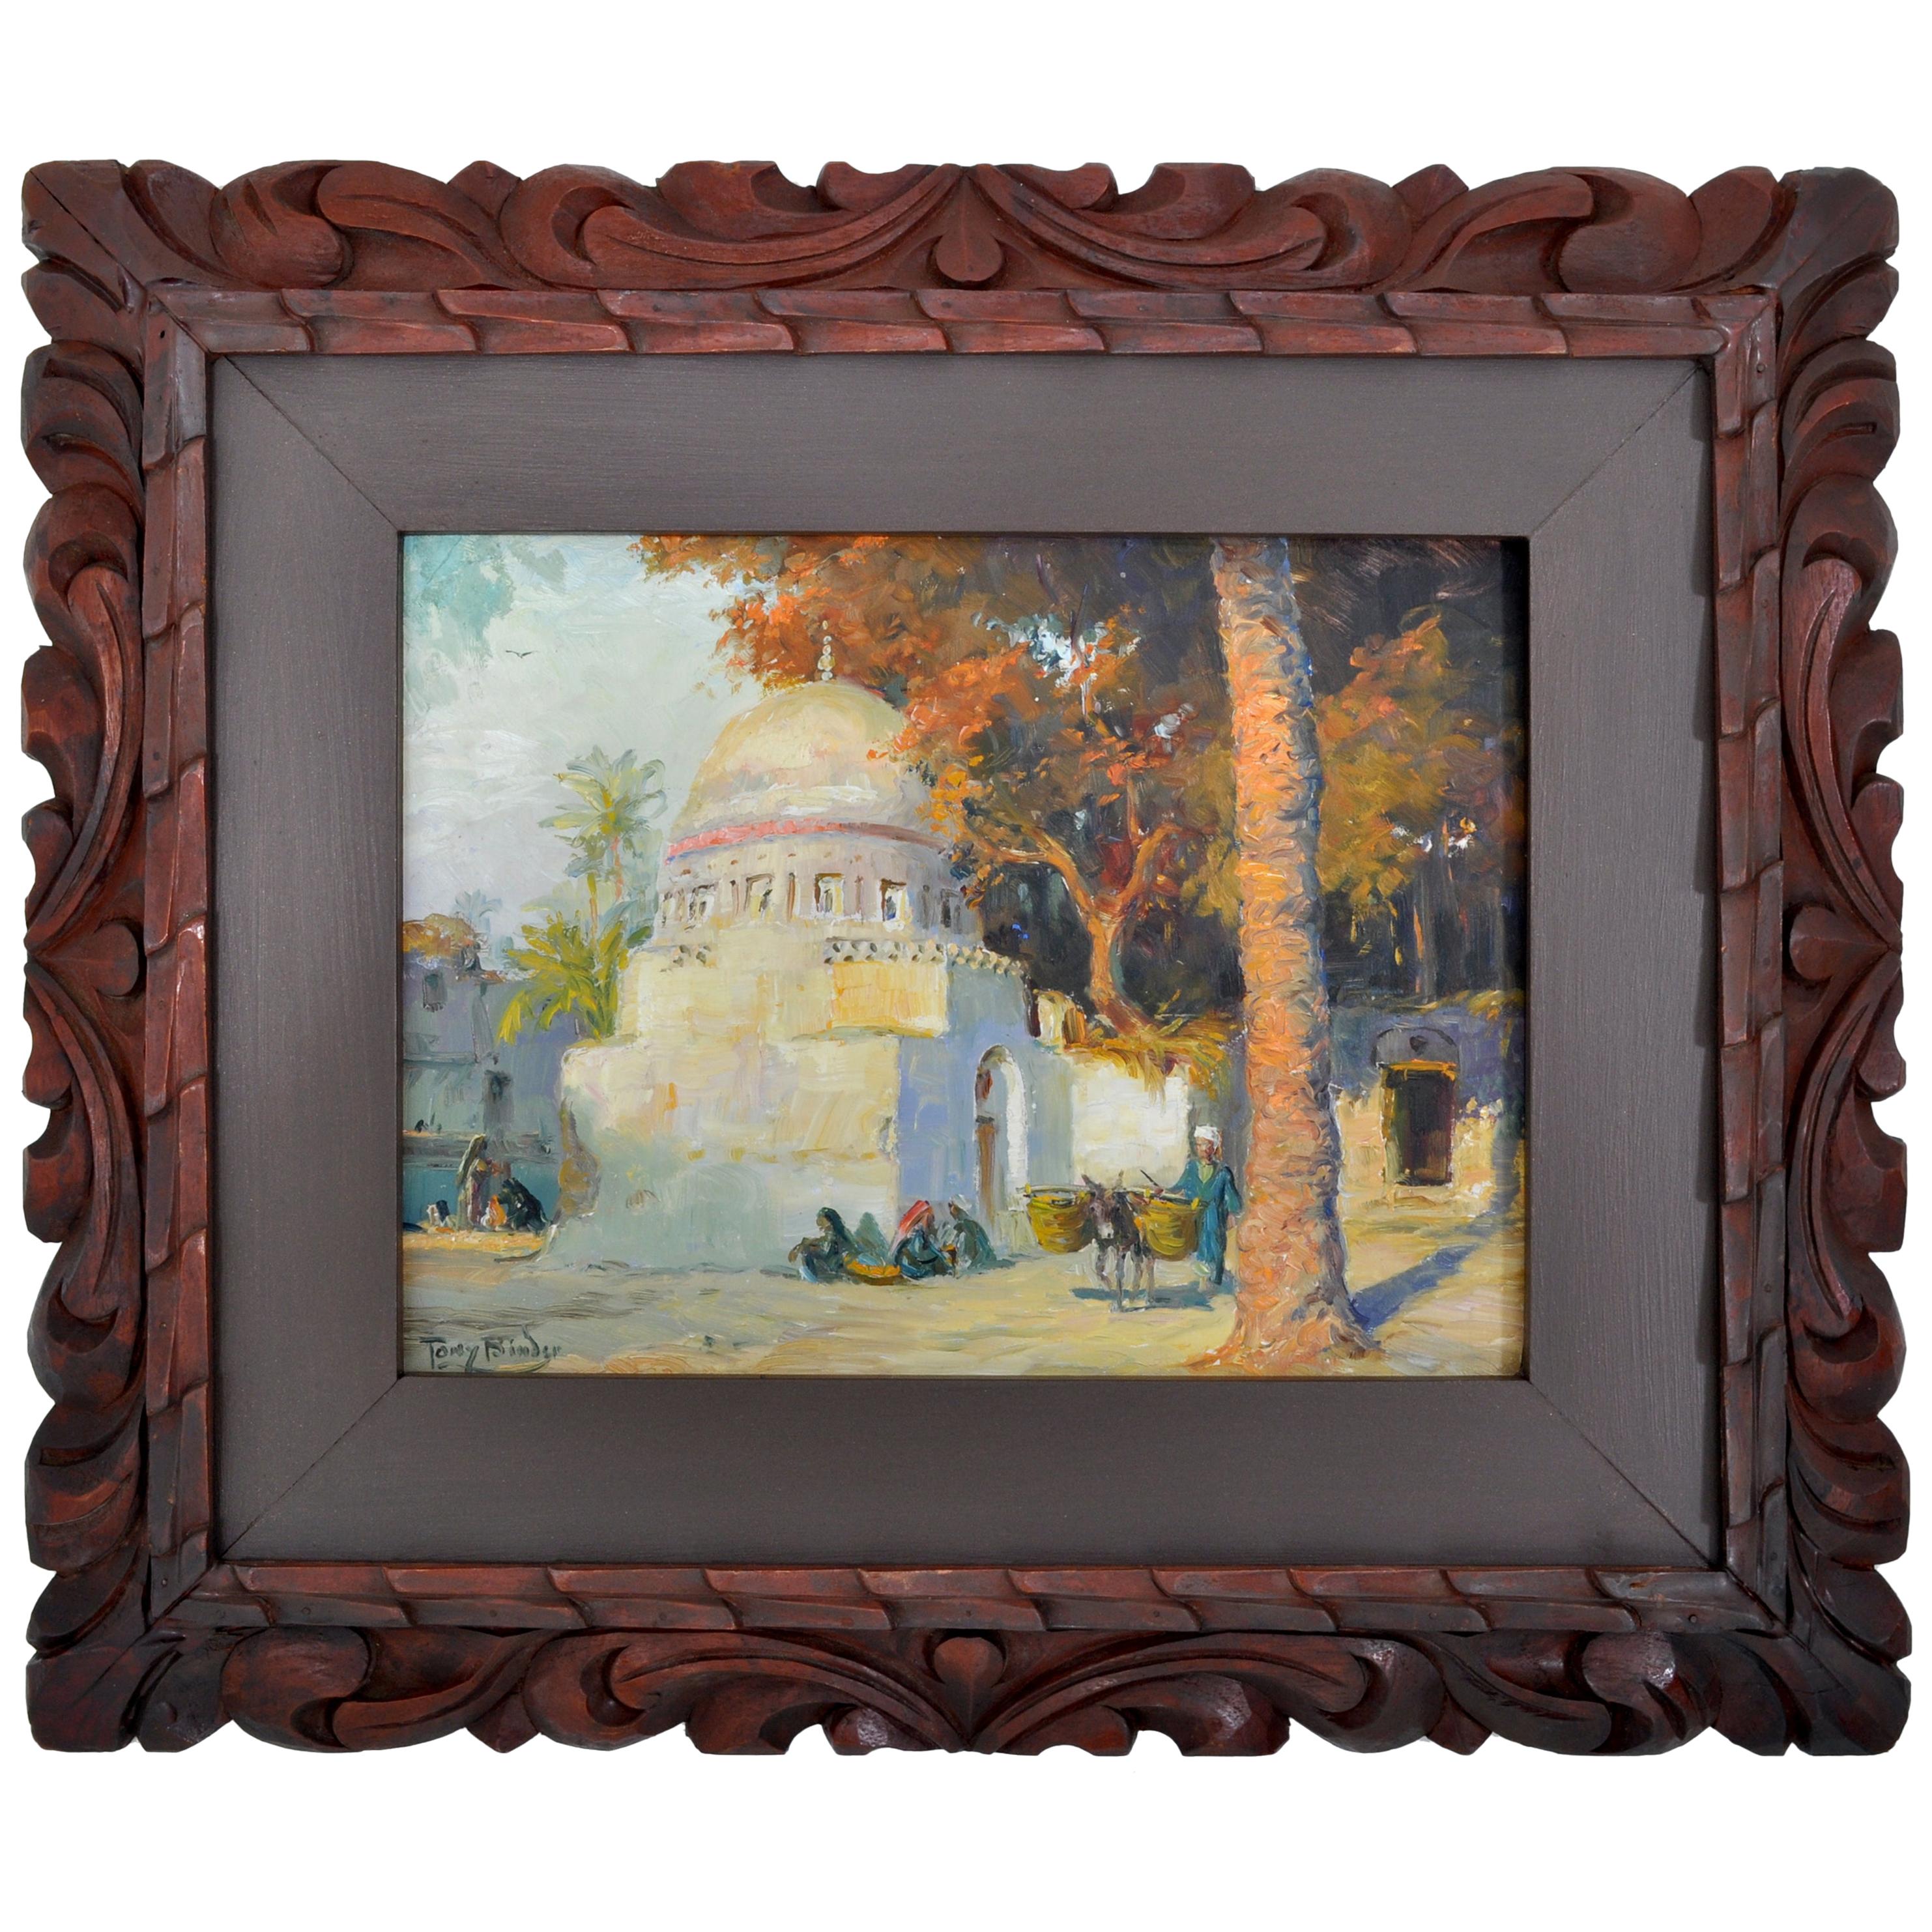 Antique Orientalist Painting, Cairo, Egypt, Oil on Panel, Tony Binder circa 1895 For Sale